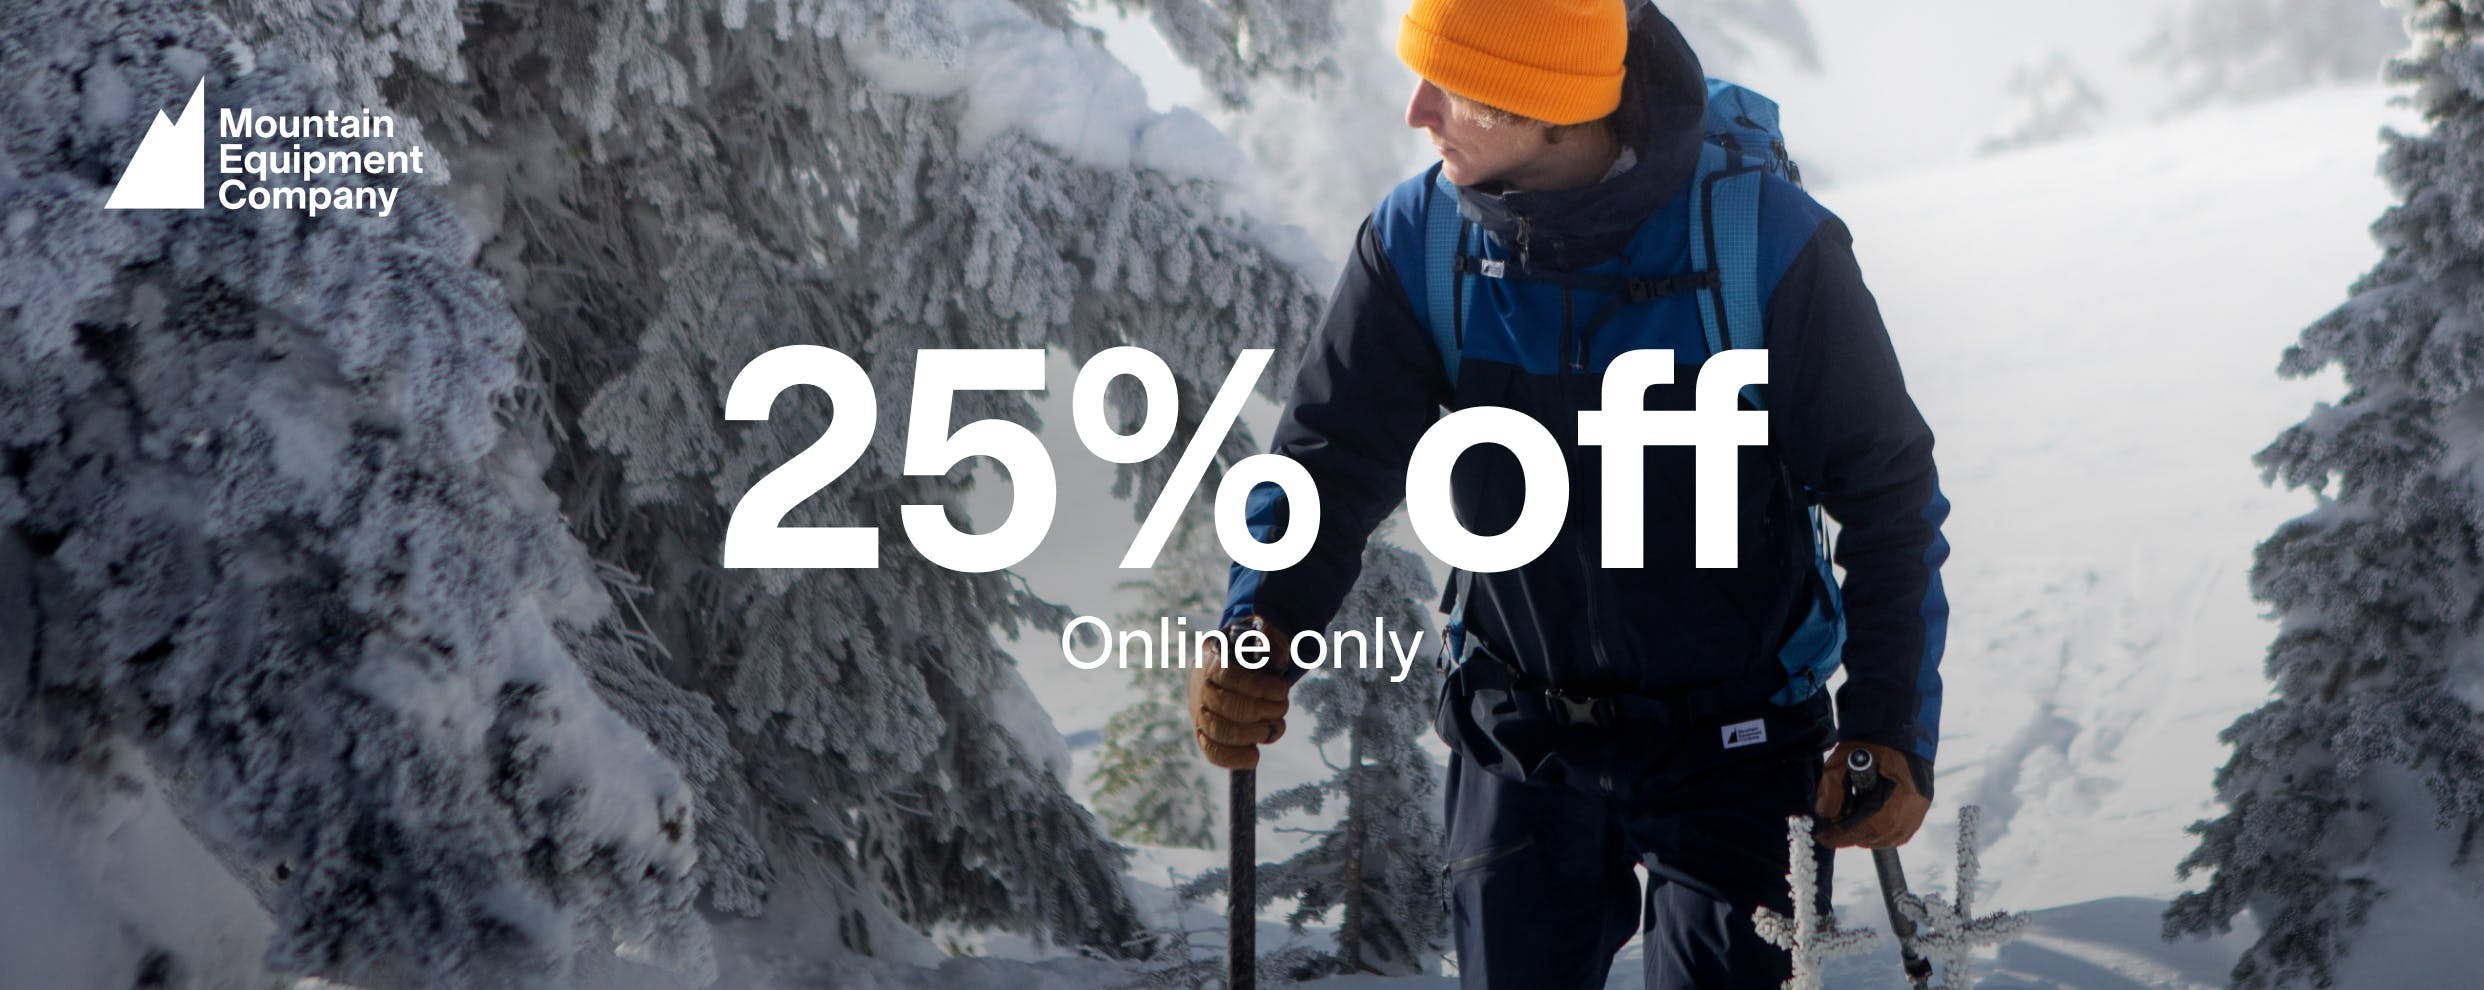 Save on MEC ski wear. No discount code needed (that’s right, automatic savings). Select styles, extended until January 11 at midnight.